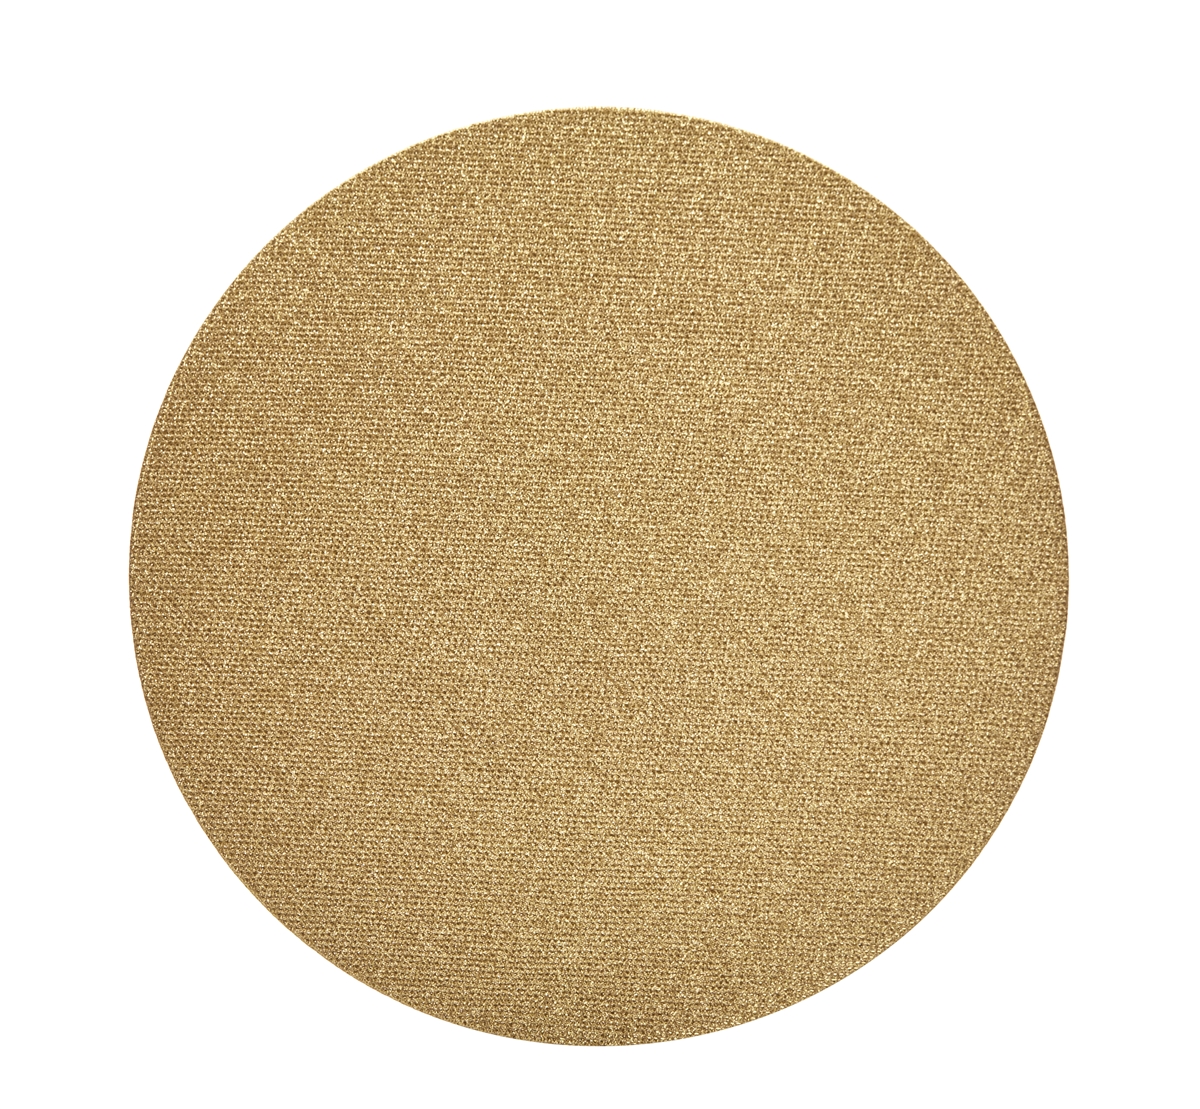 Water Resistant Gold Glitter Charger - Extra Heavyweight Cardboard